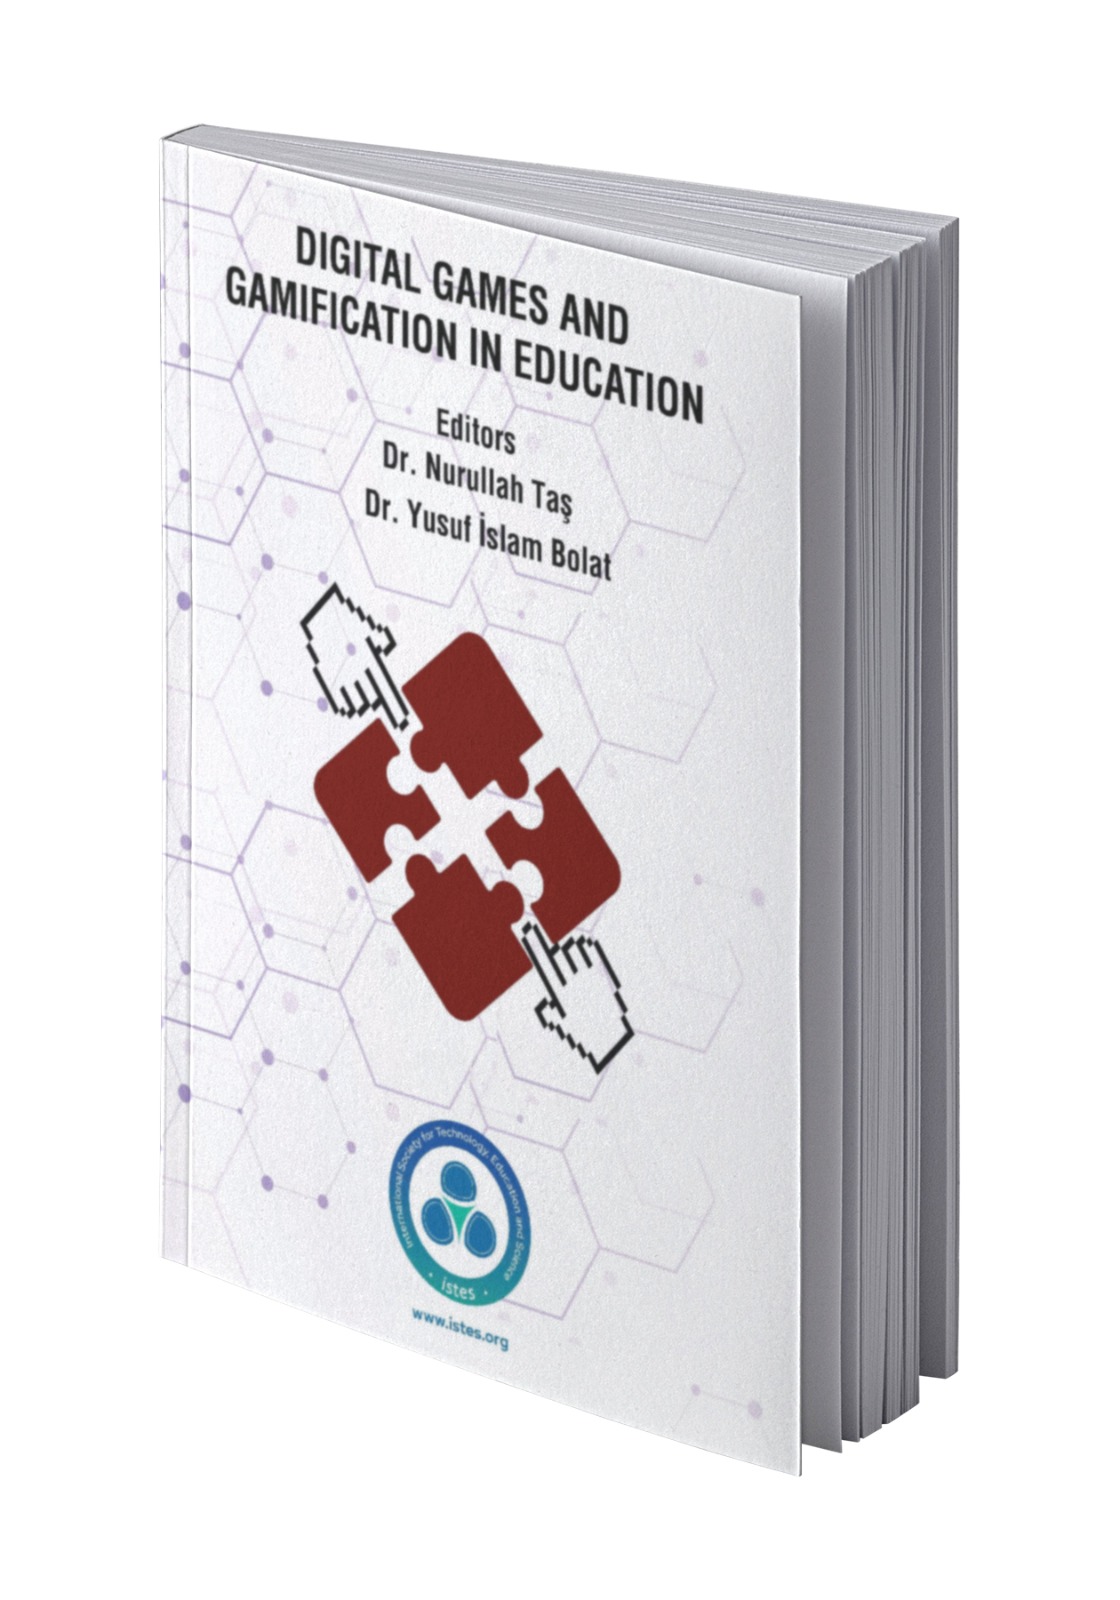 					View Digital Games and Gamification in Education
				